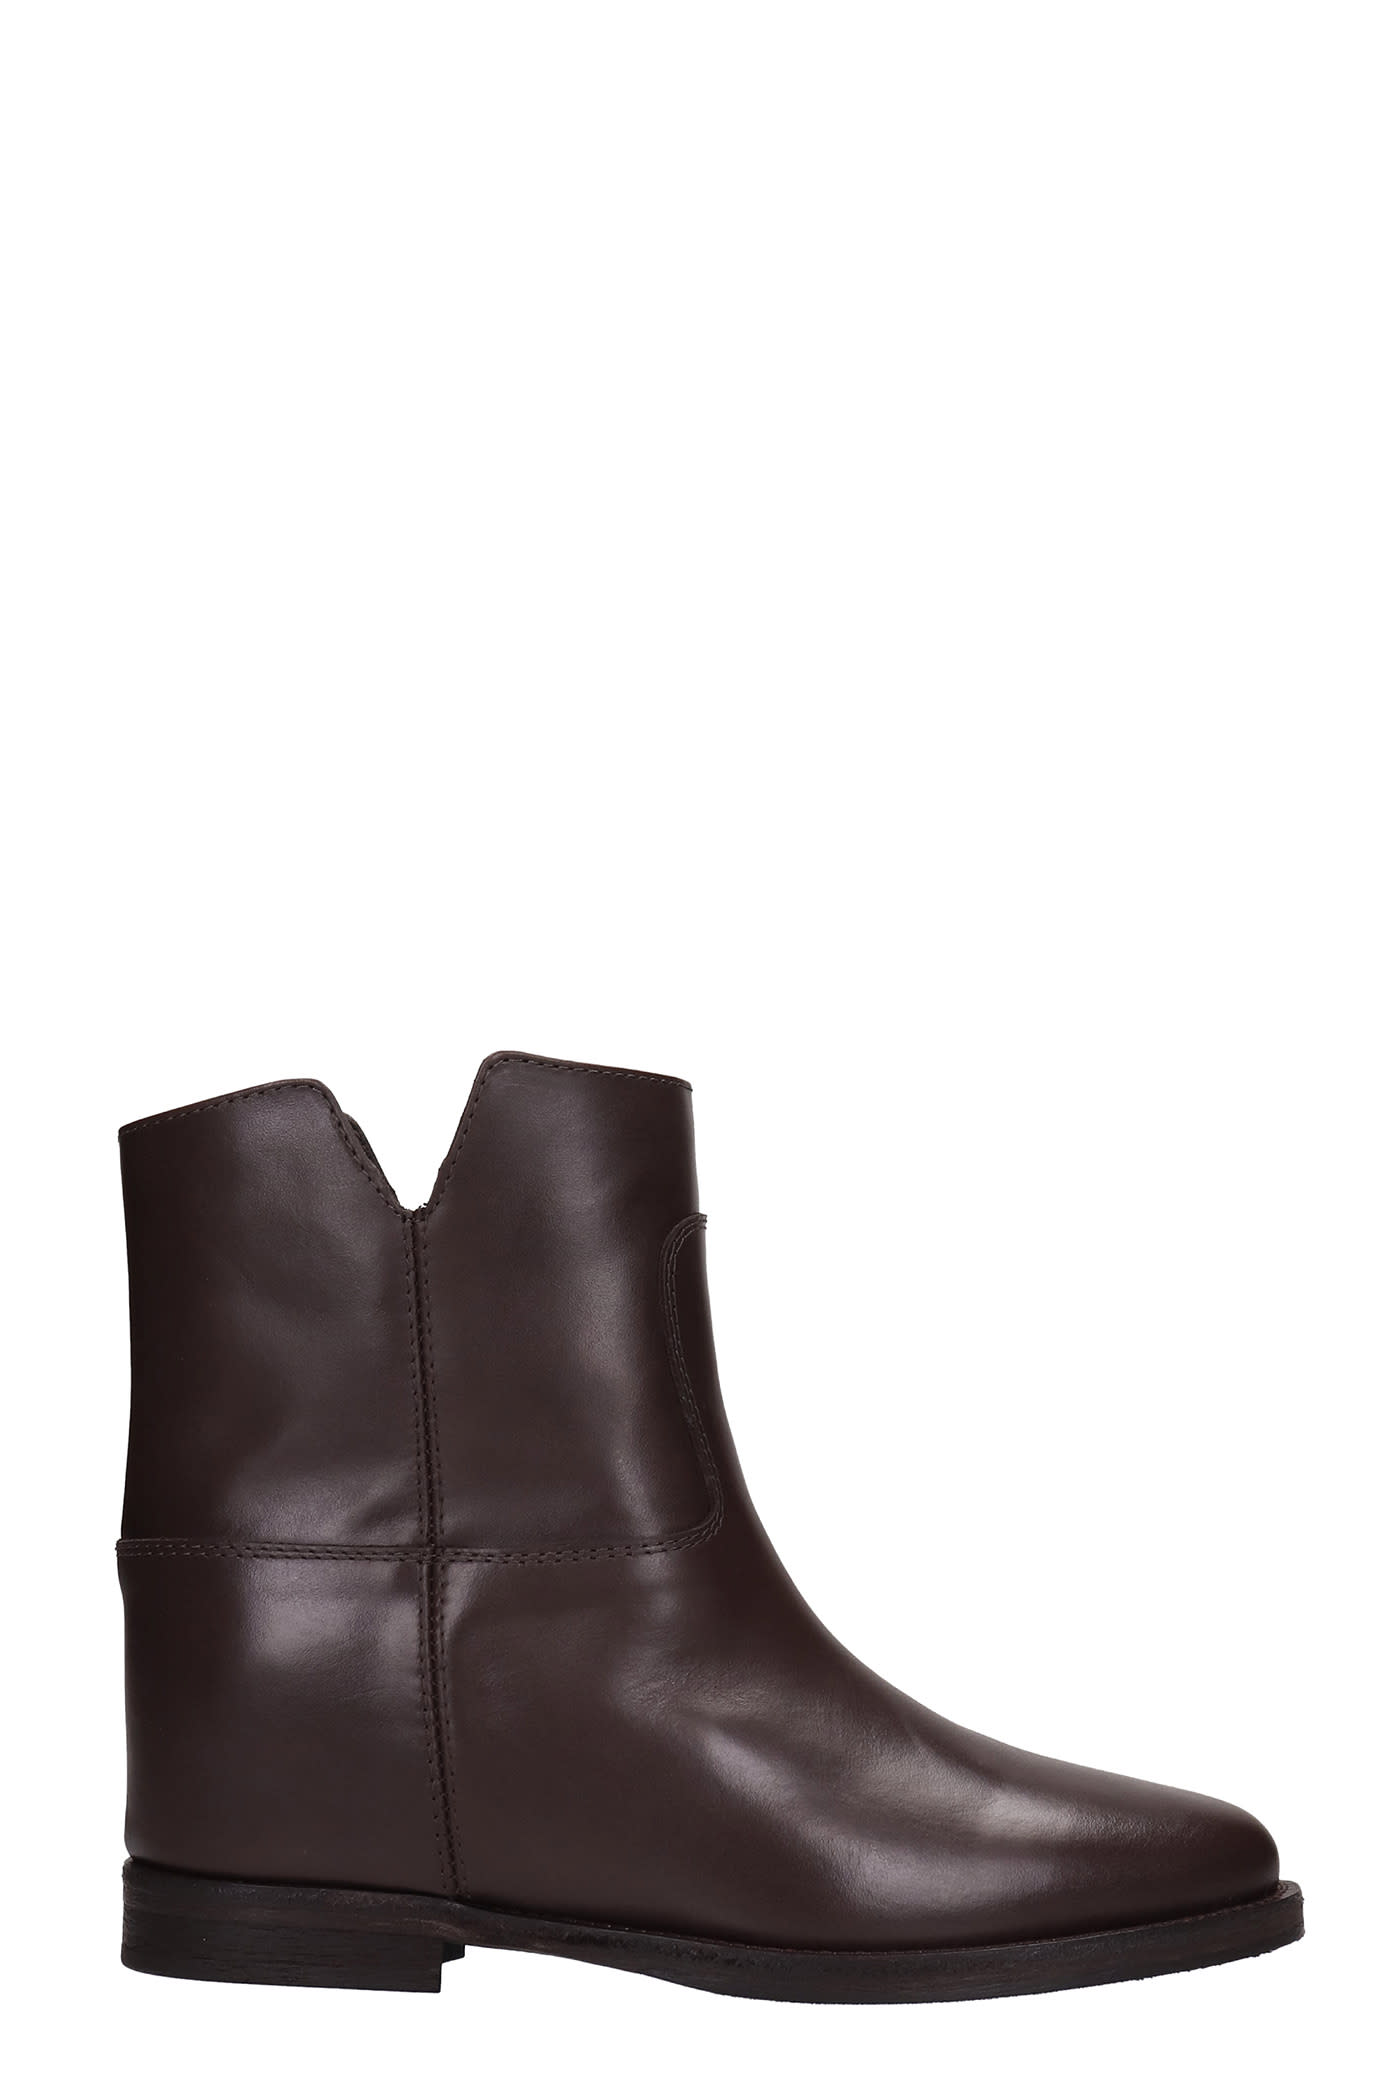 Via Roma 15 Ankel Boots Inside Wedge In Dark Brown Leather